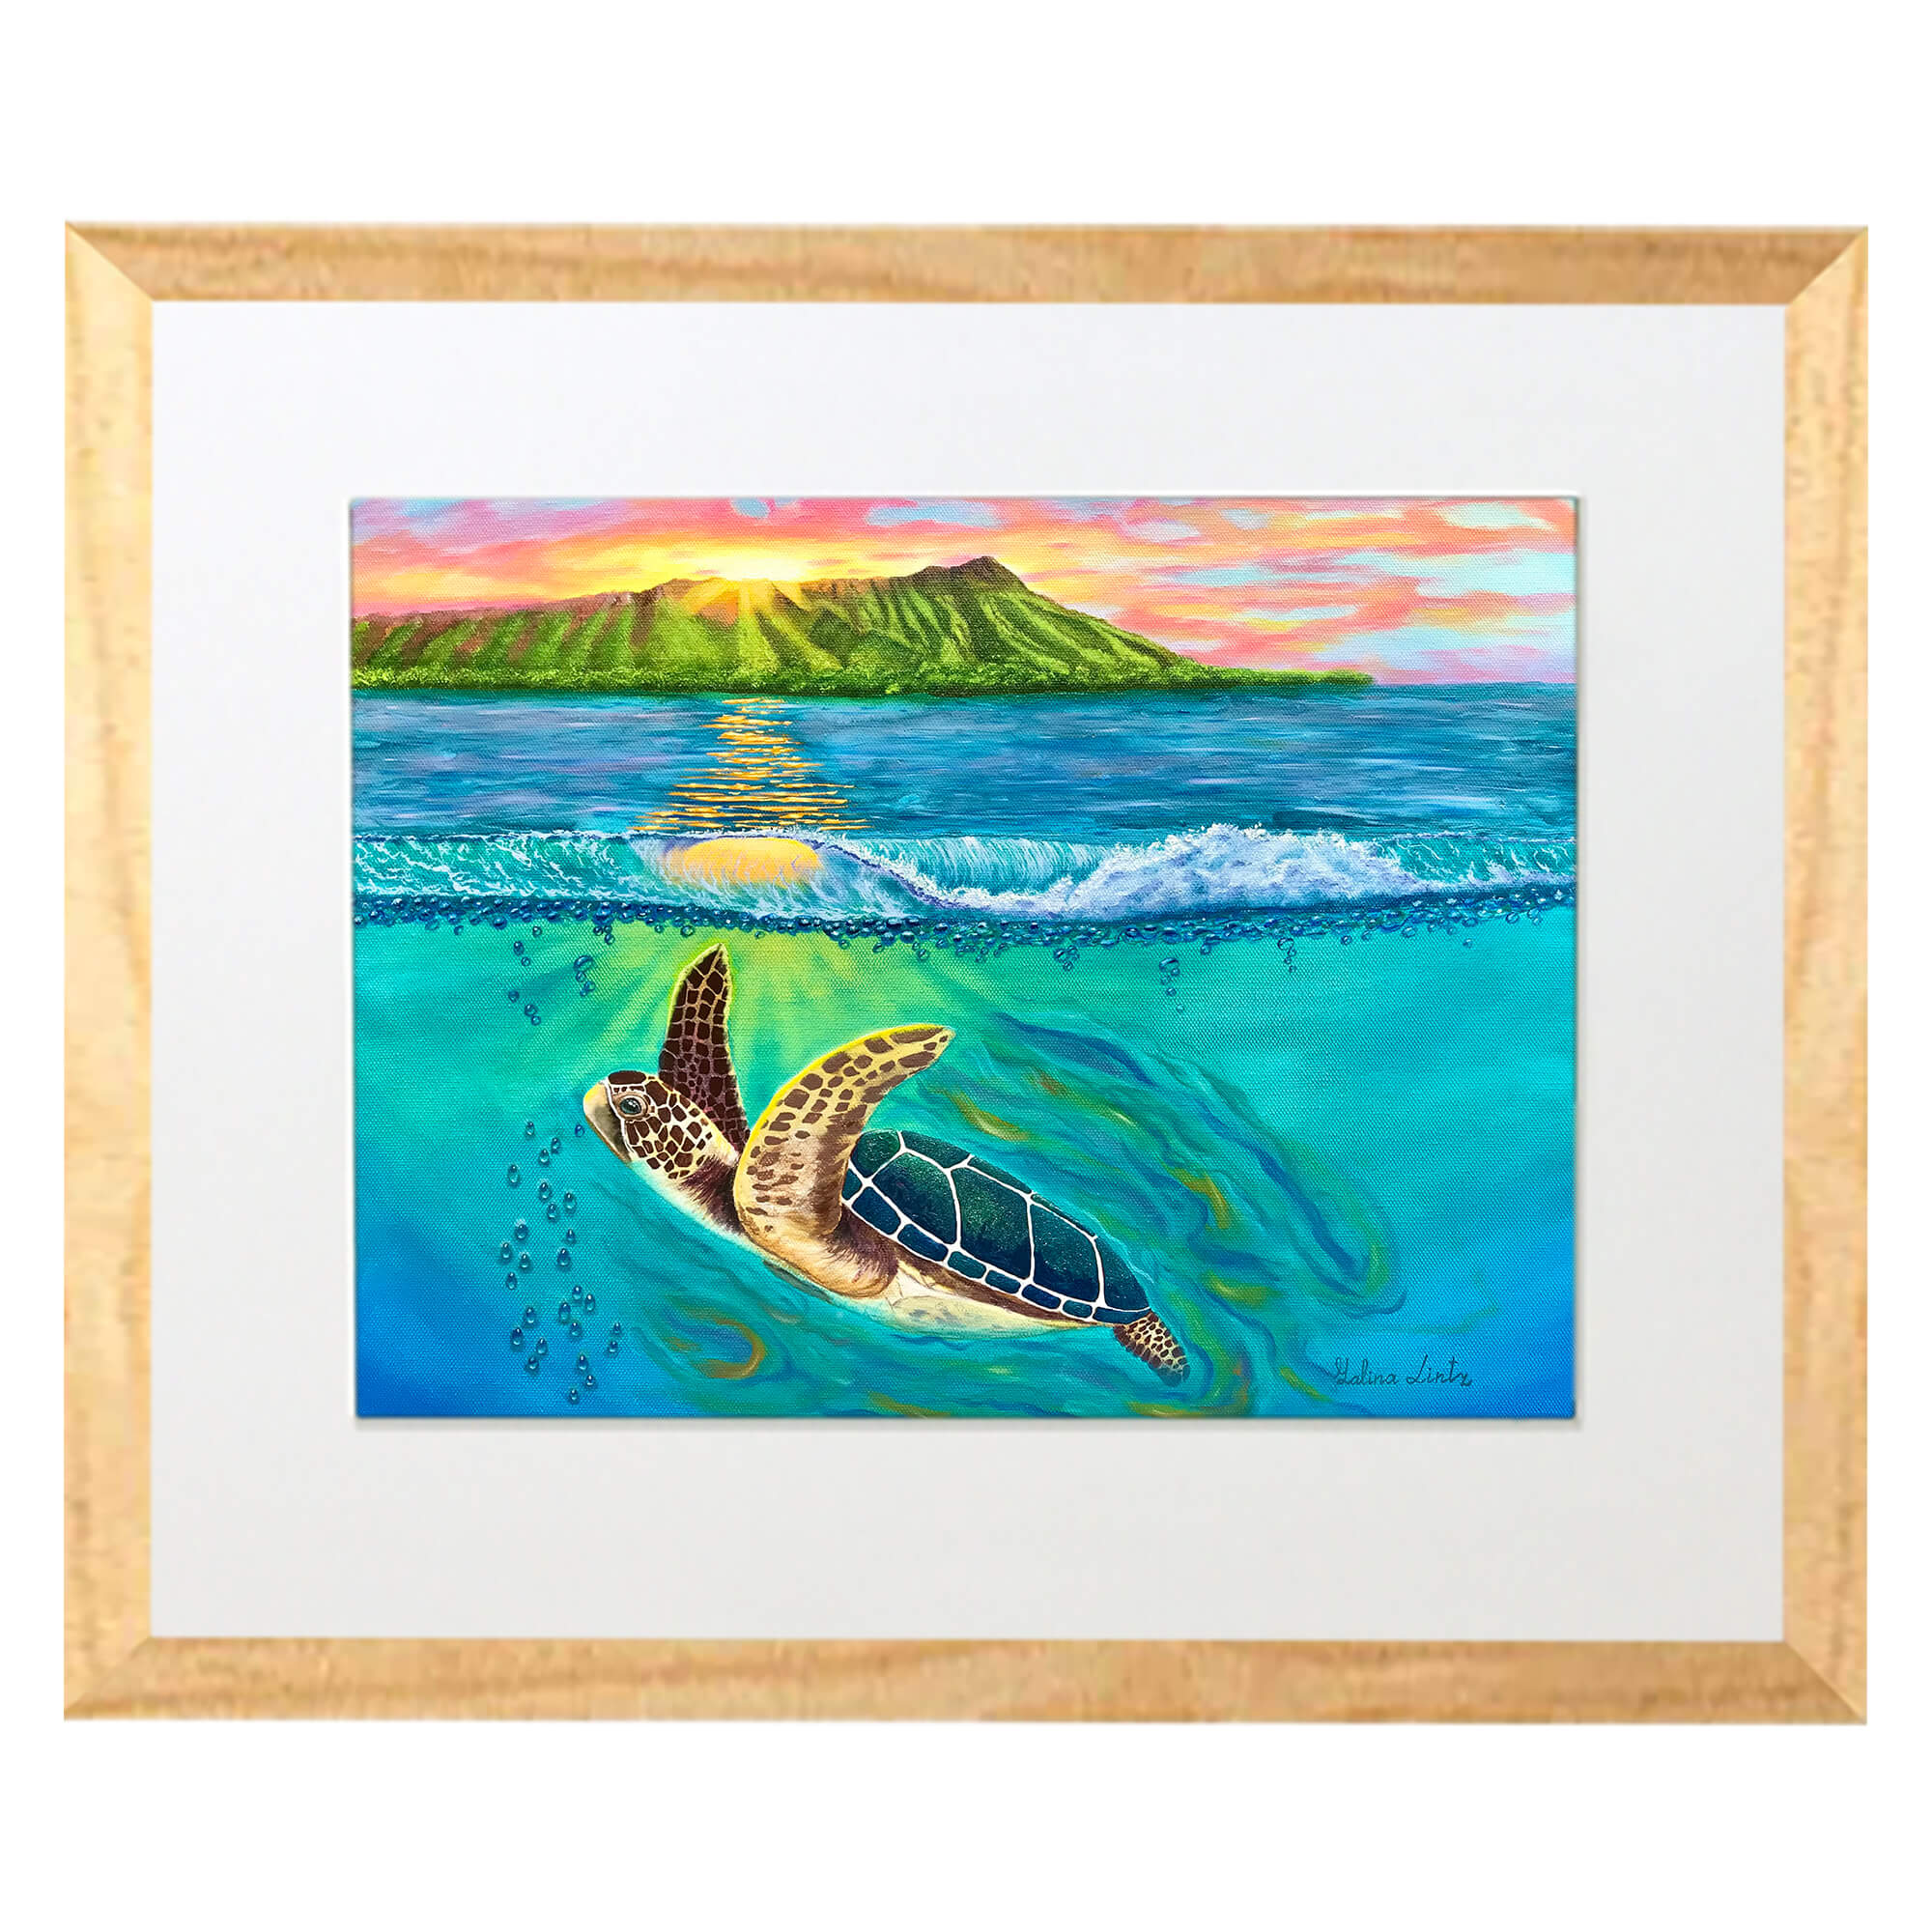 Matted art print with wood frame showcasing  pink with orange clouds by hawaii artist Galina Lintz